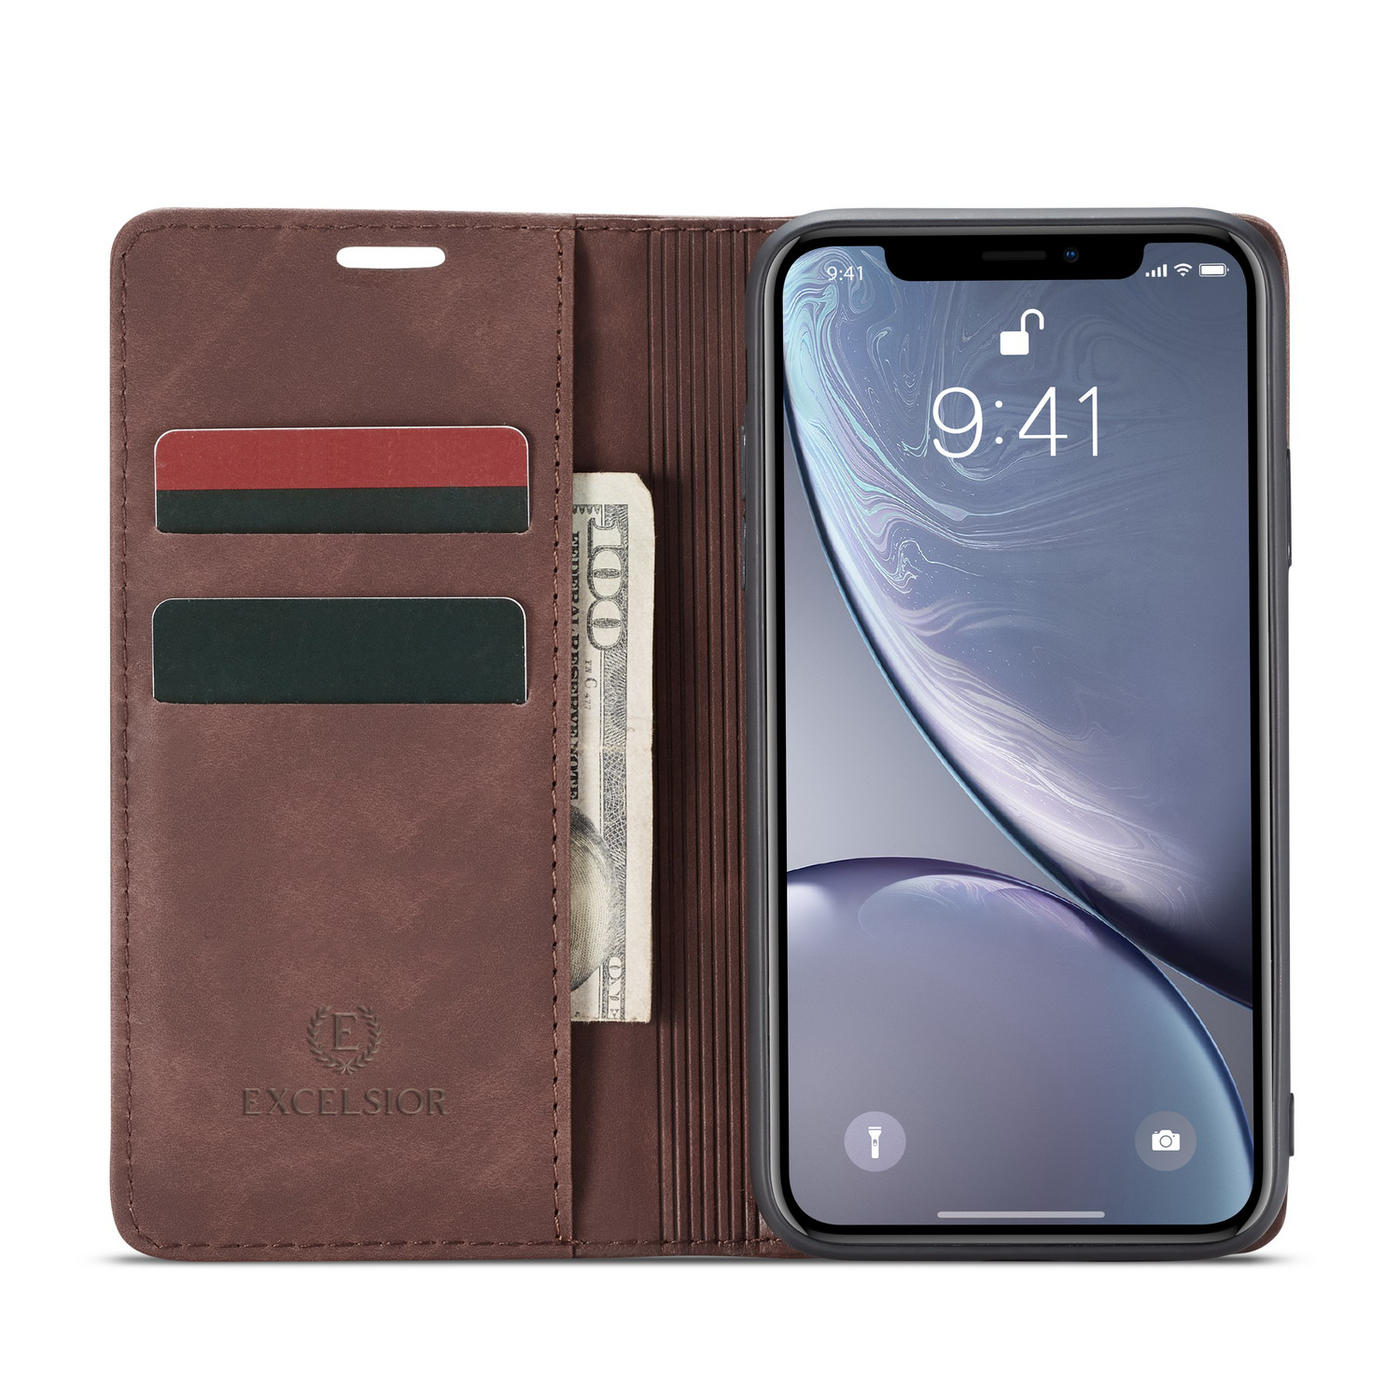 Apple iPhone XR Leather Wallet flip case cover with stand function